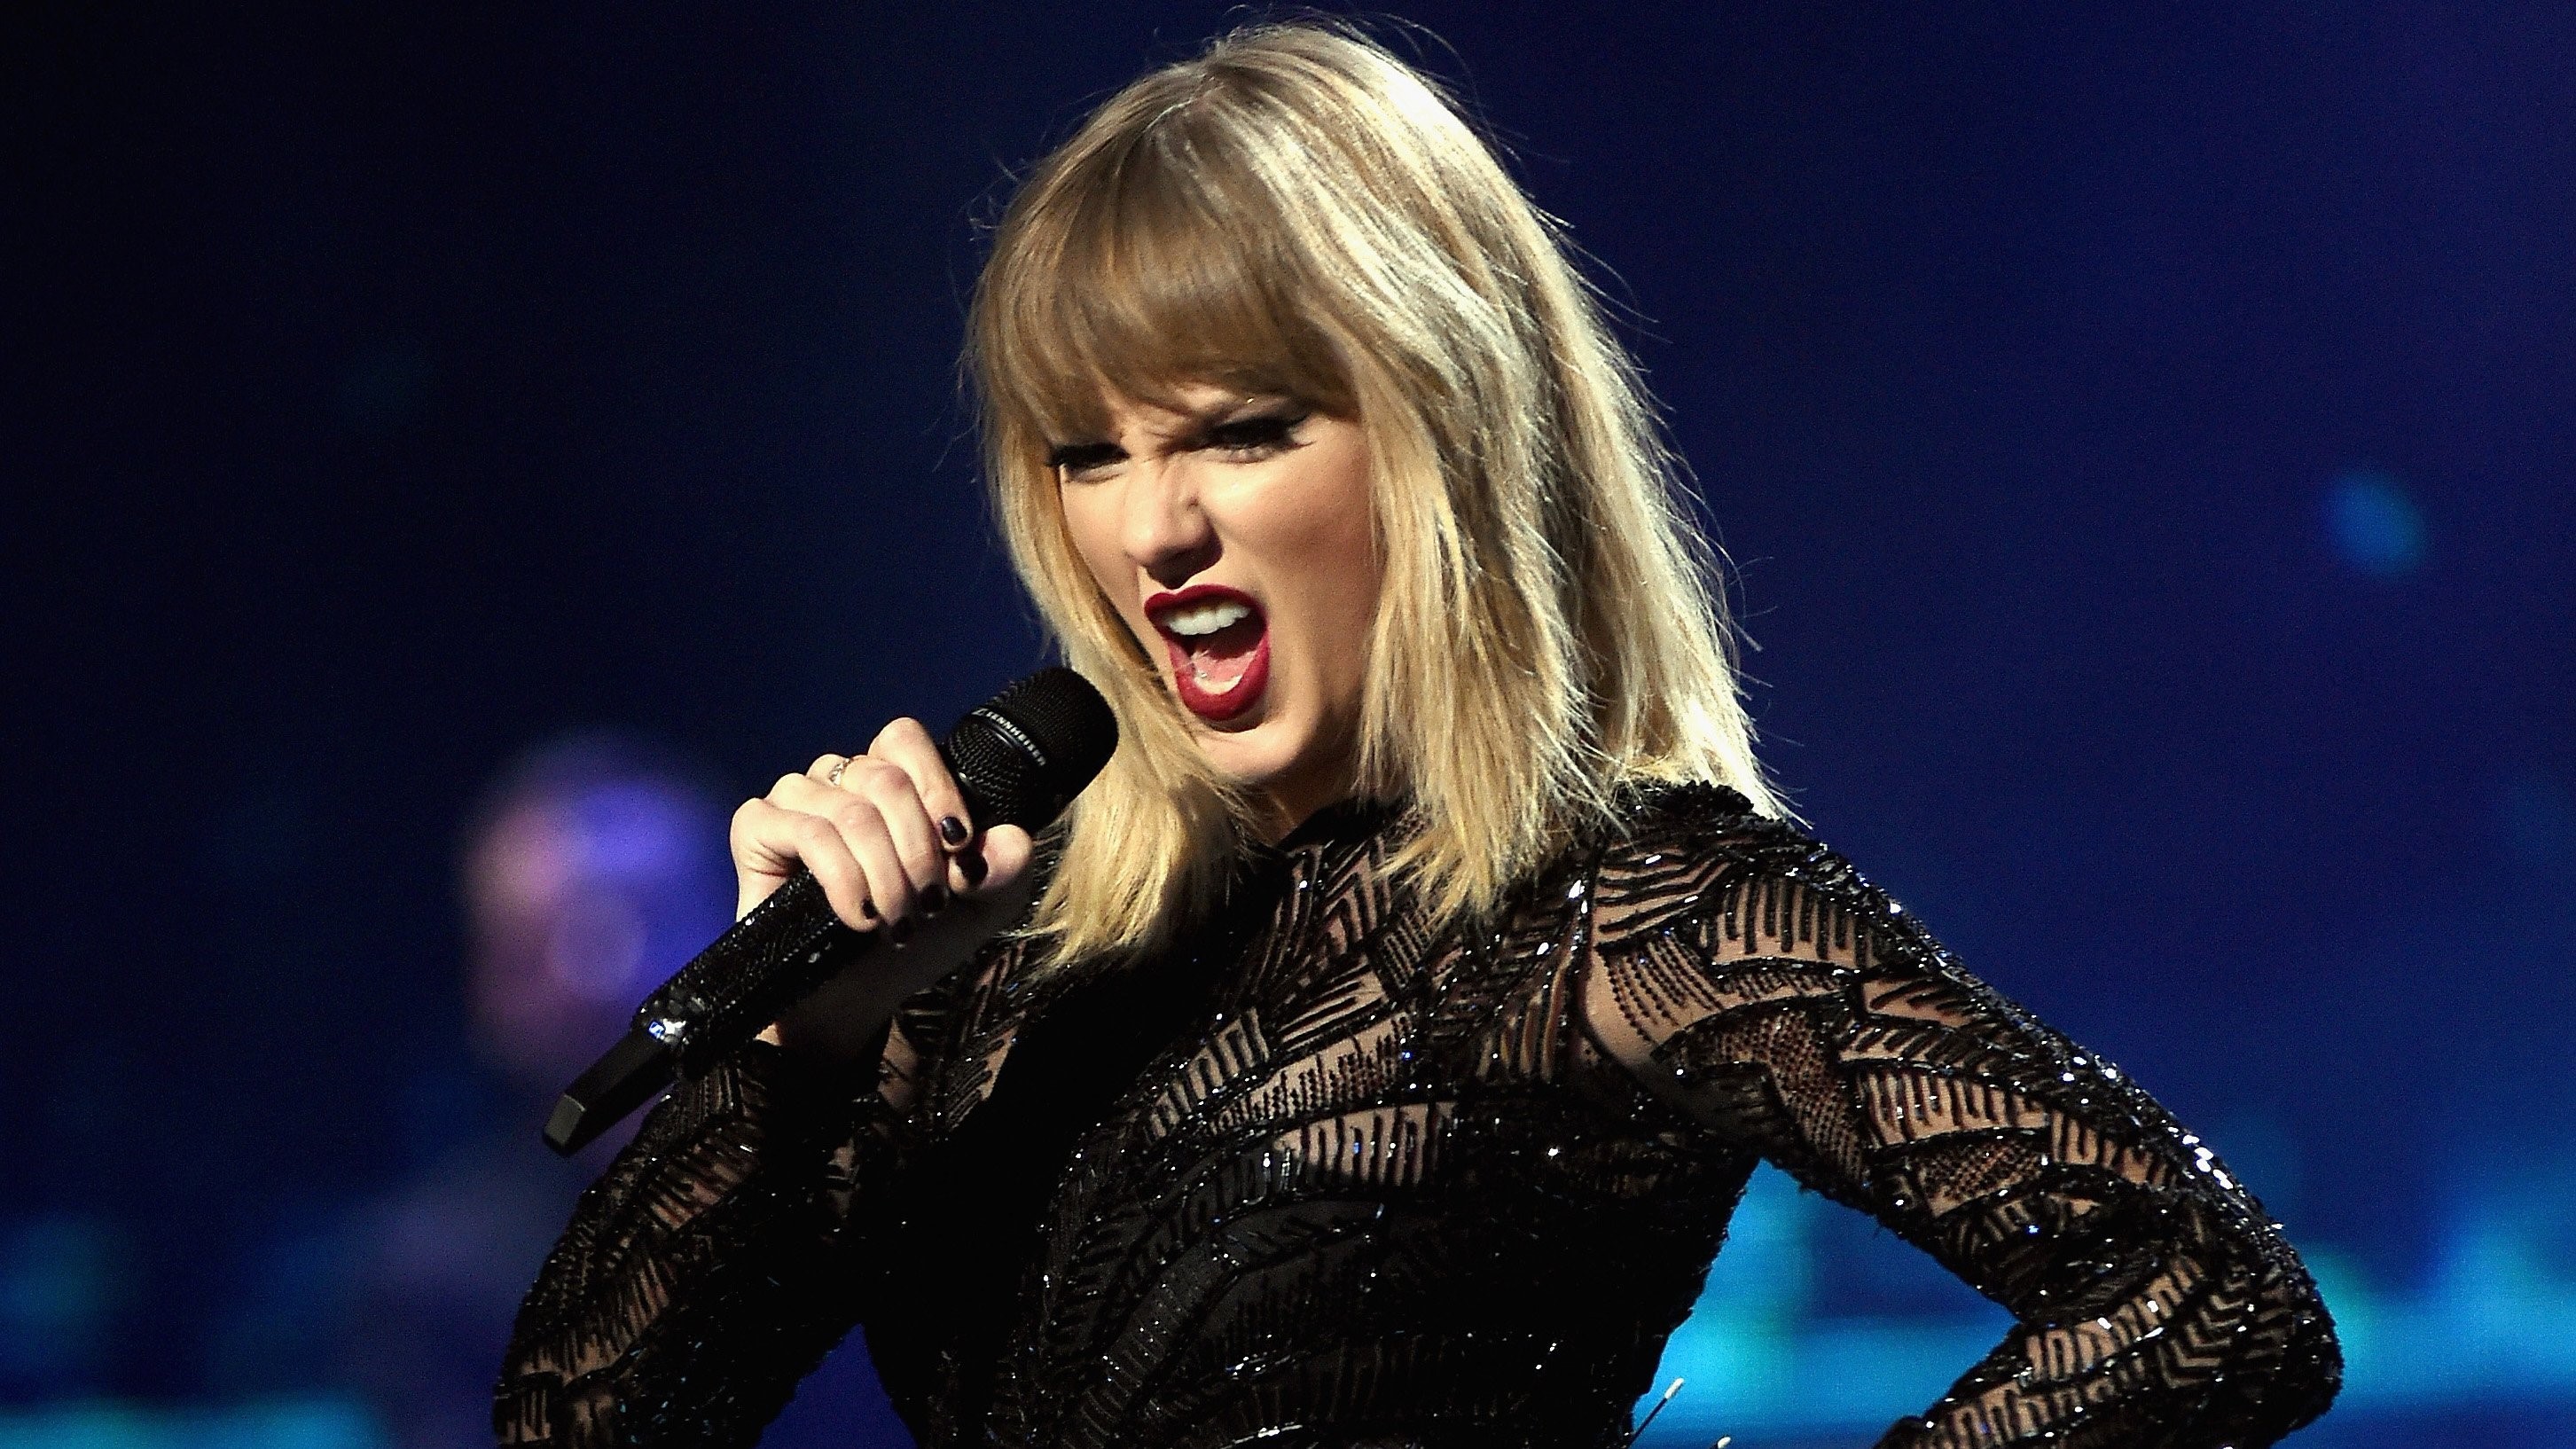 Taylor Swift announces 2020 tour with only 2 US stops